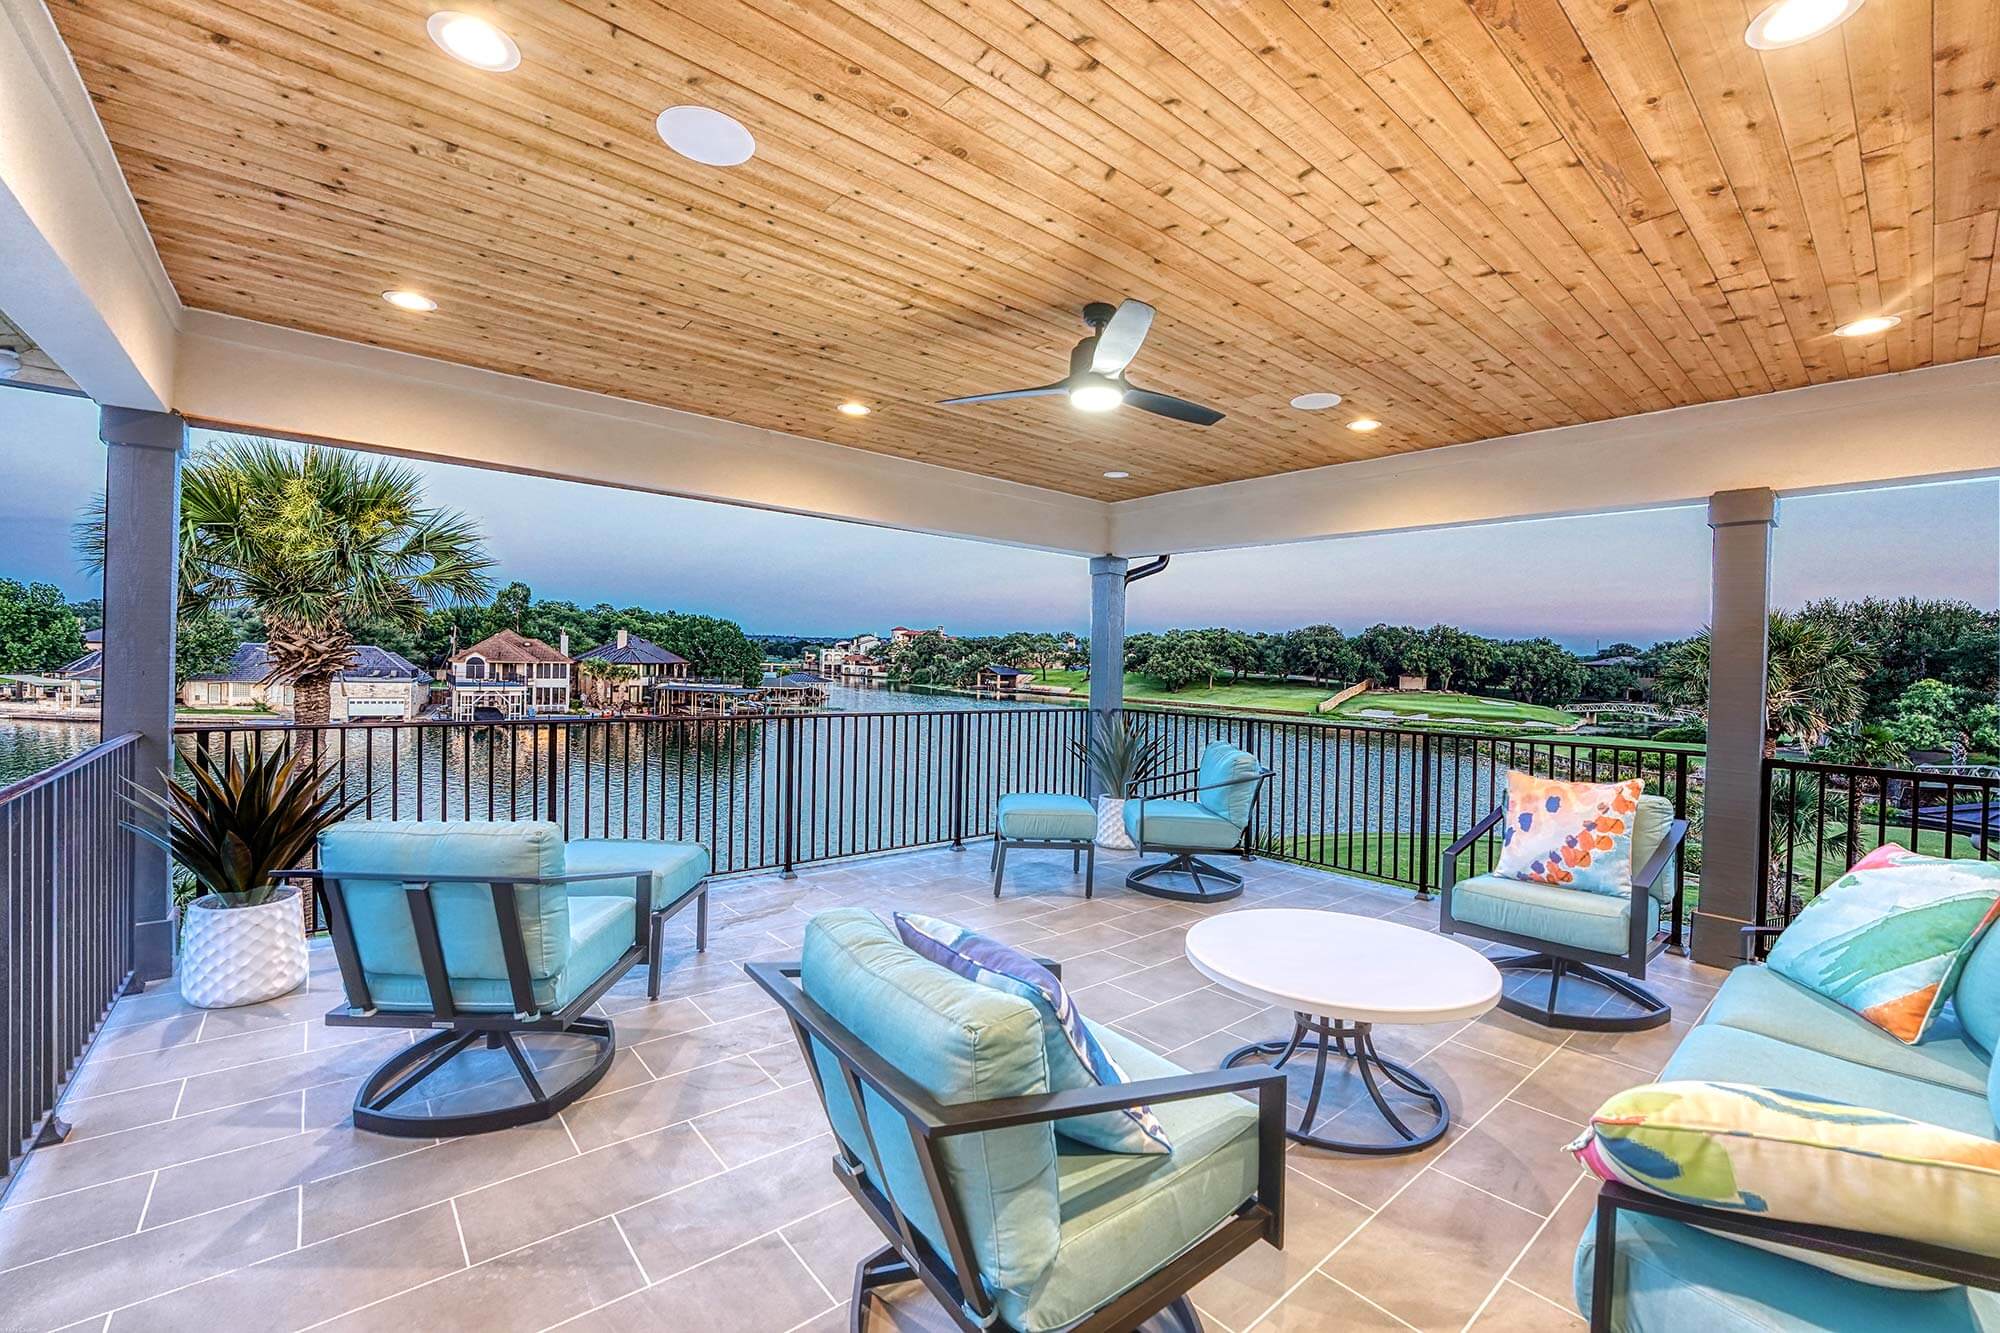 Zbranek and Holt Custom Homes Soft Modern Transitional Upper Covered Patio Overlooking Lake and Pool